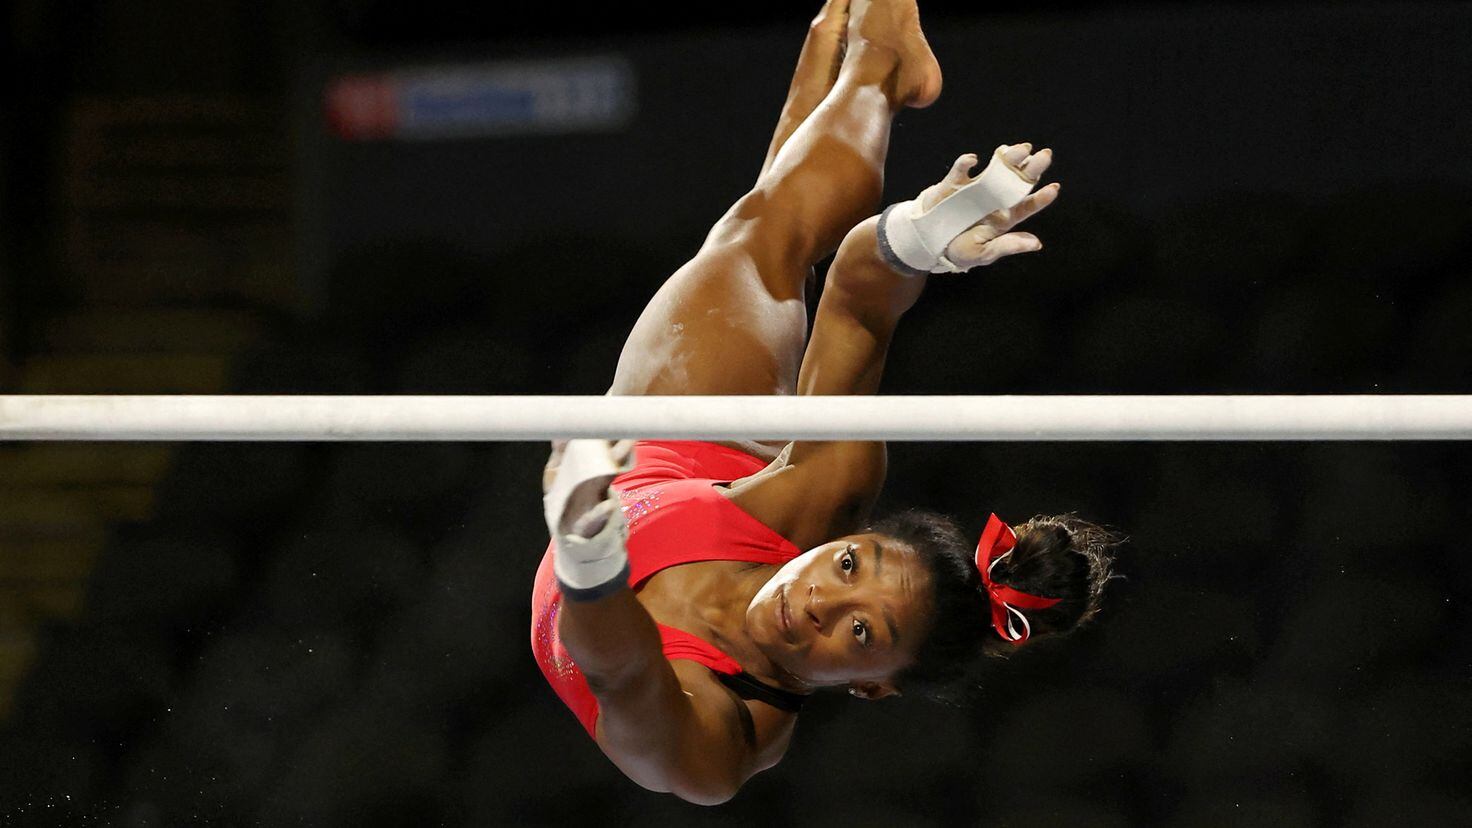 Simone Biles will compete in her sixth world championships